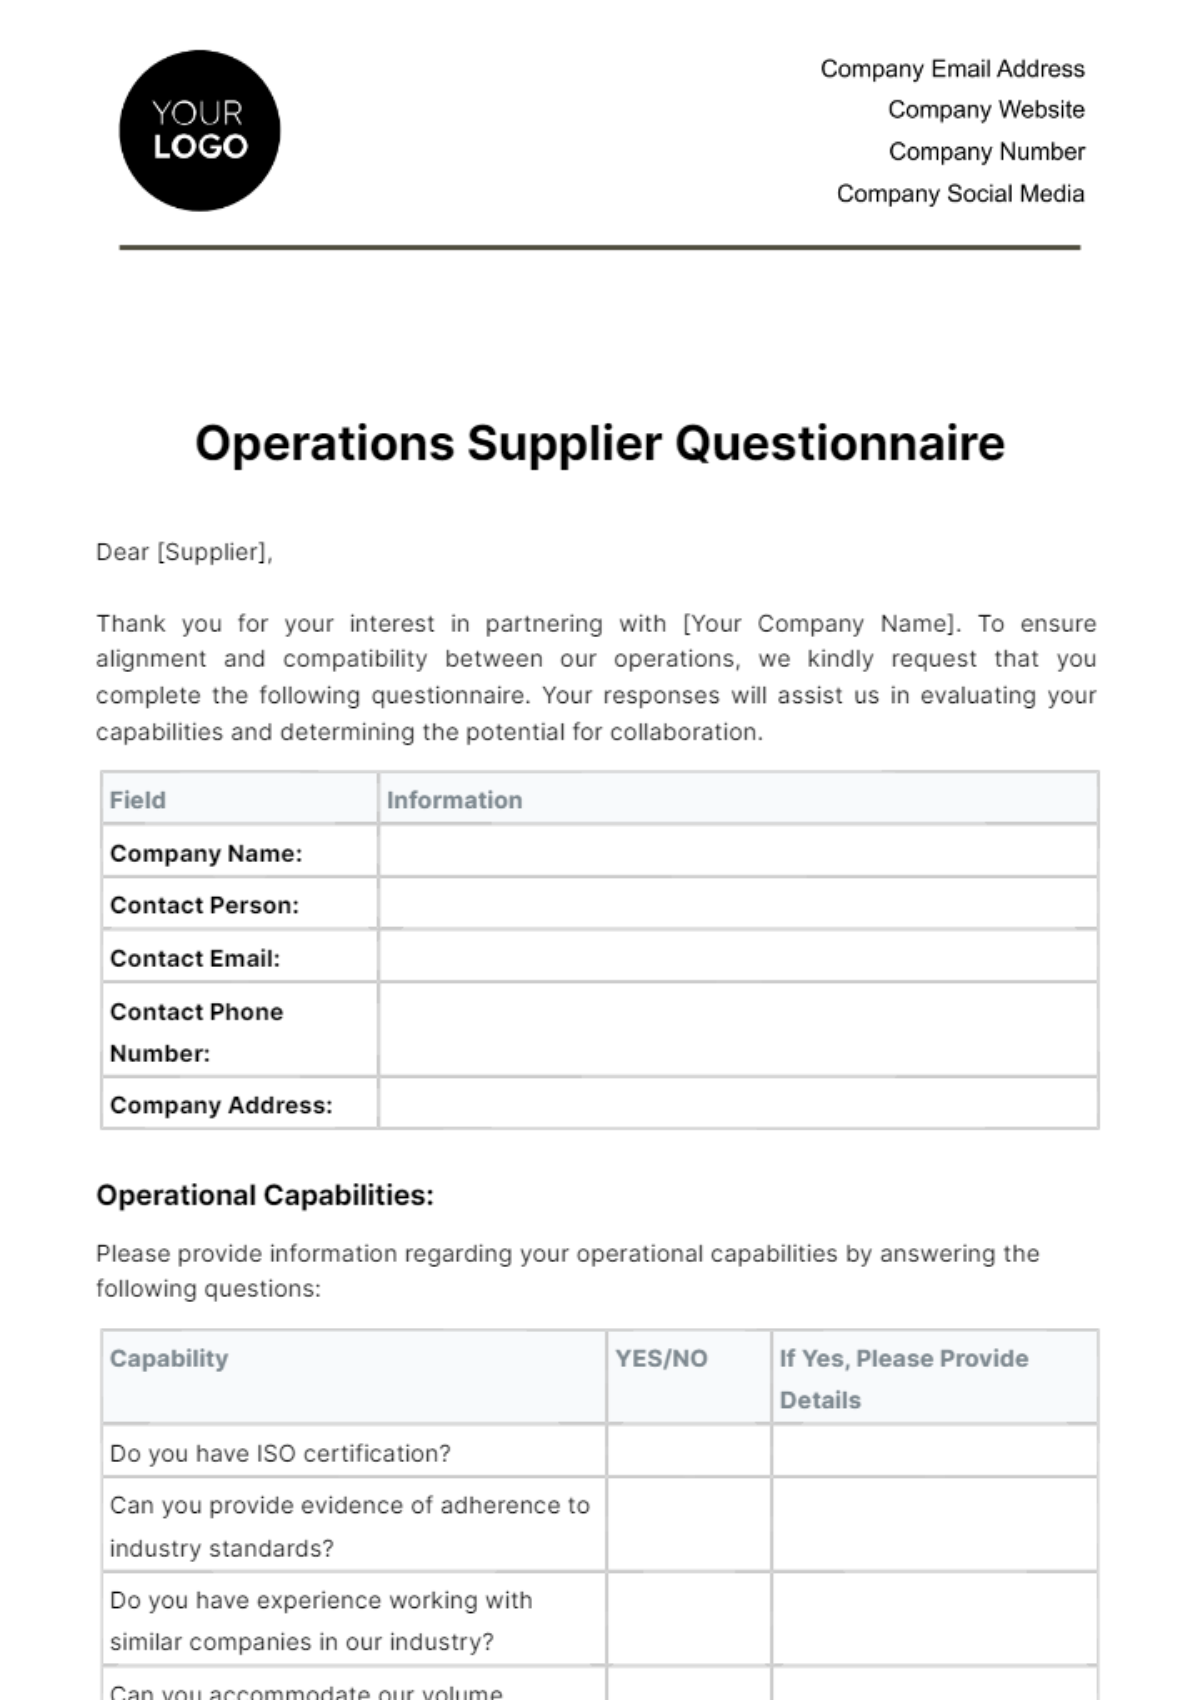 Operations Supplier Questionnaire Template